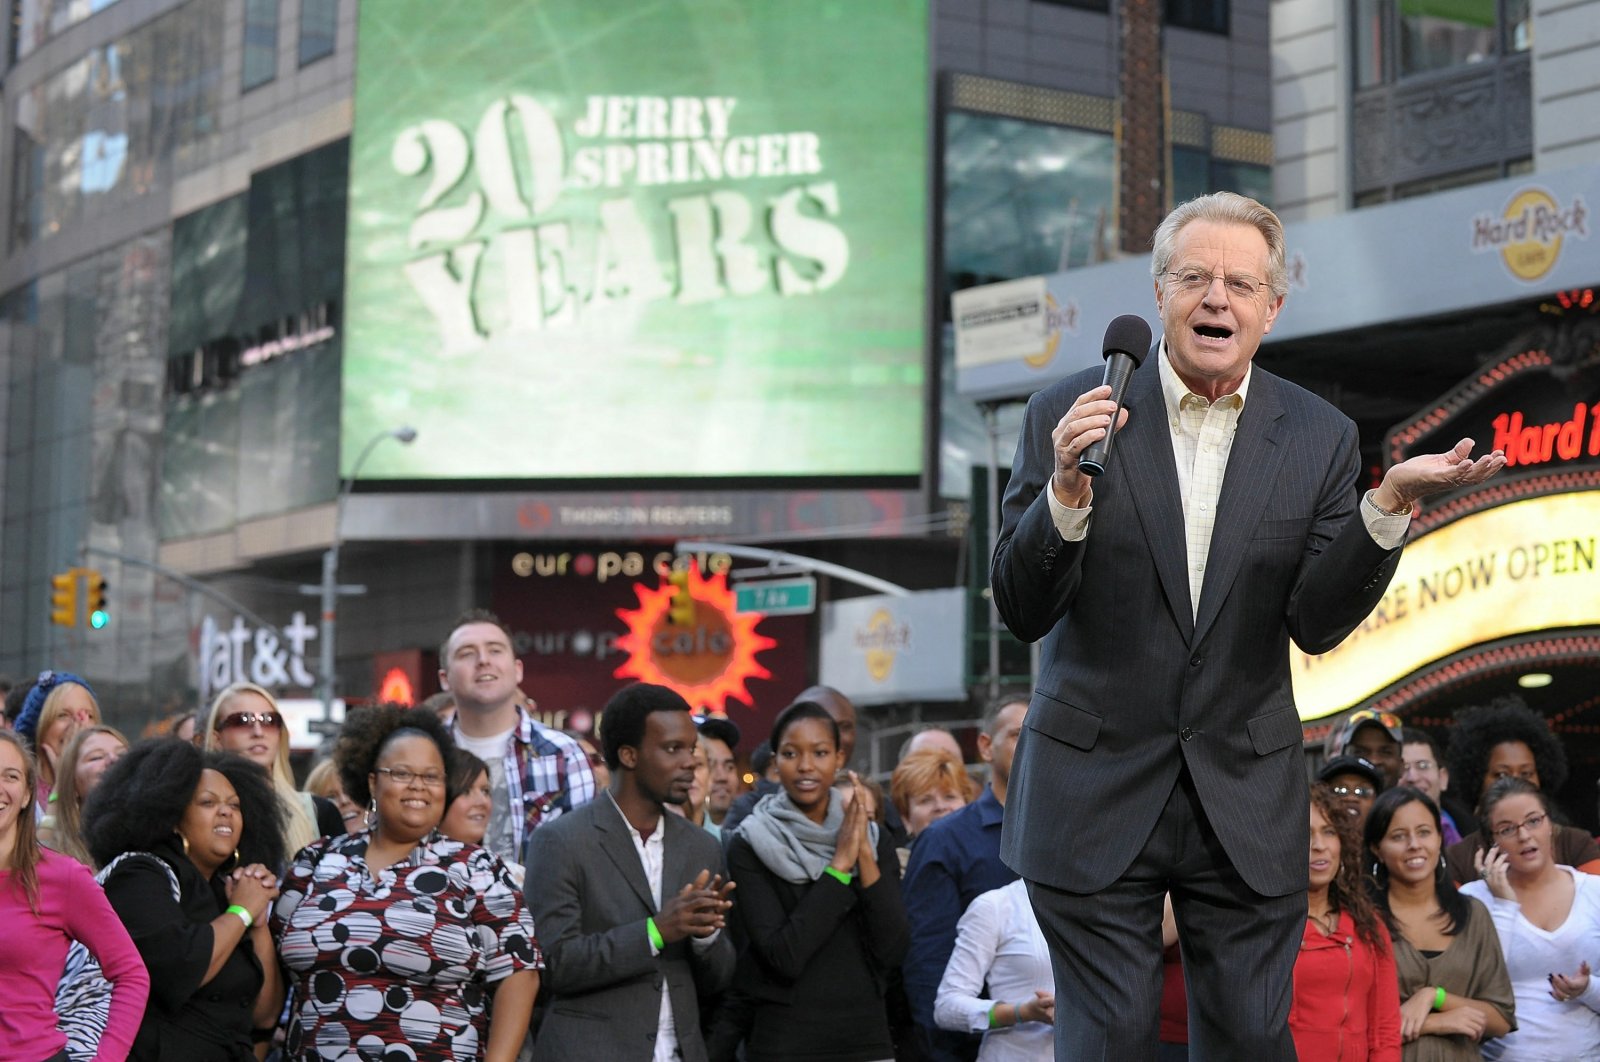 TV host Jerry Springer celebrates the taping of &quot;The Jerry Springer Show&quot; 20th anniversary show at Military Island at Times Square in New York, U.S., Oct. 11, 2010. (AFP File Photo)